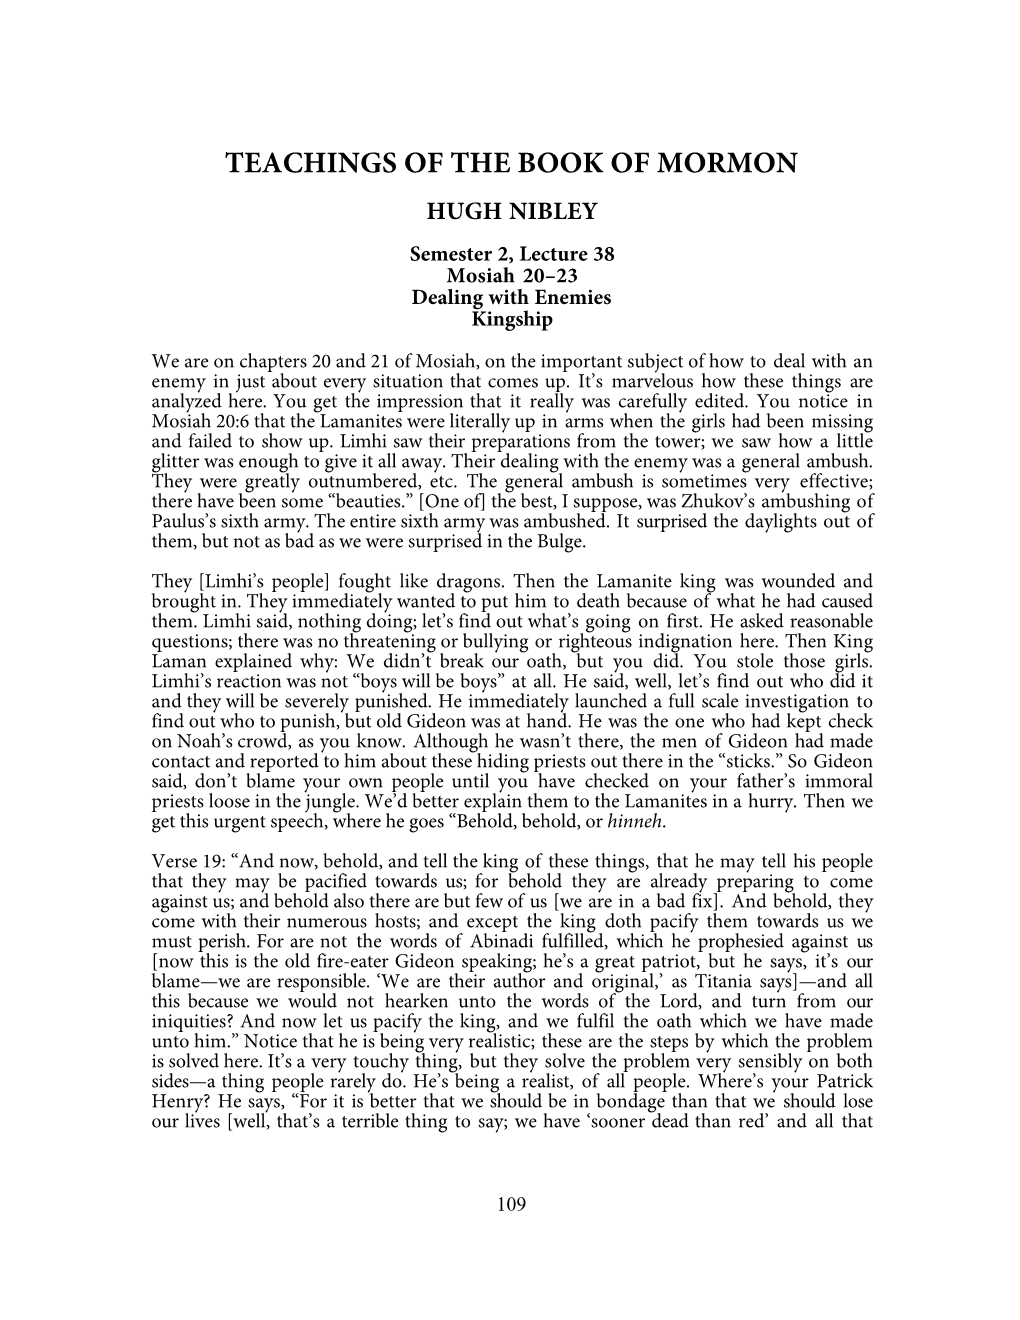 TEACHINGS of the BOOK of MORMON HUGH NIBLEY Semester 2, Lecture 38 Mosiah 20–23 Dealing with Enemies Kingship